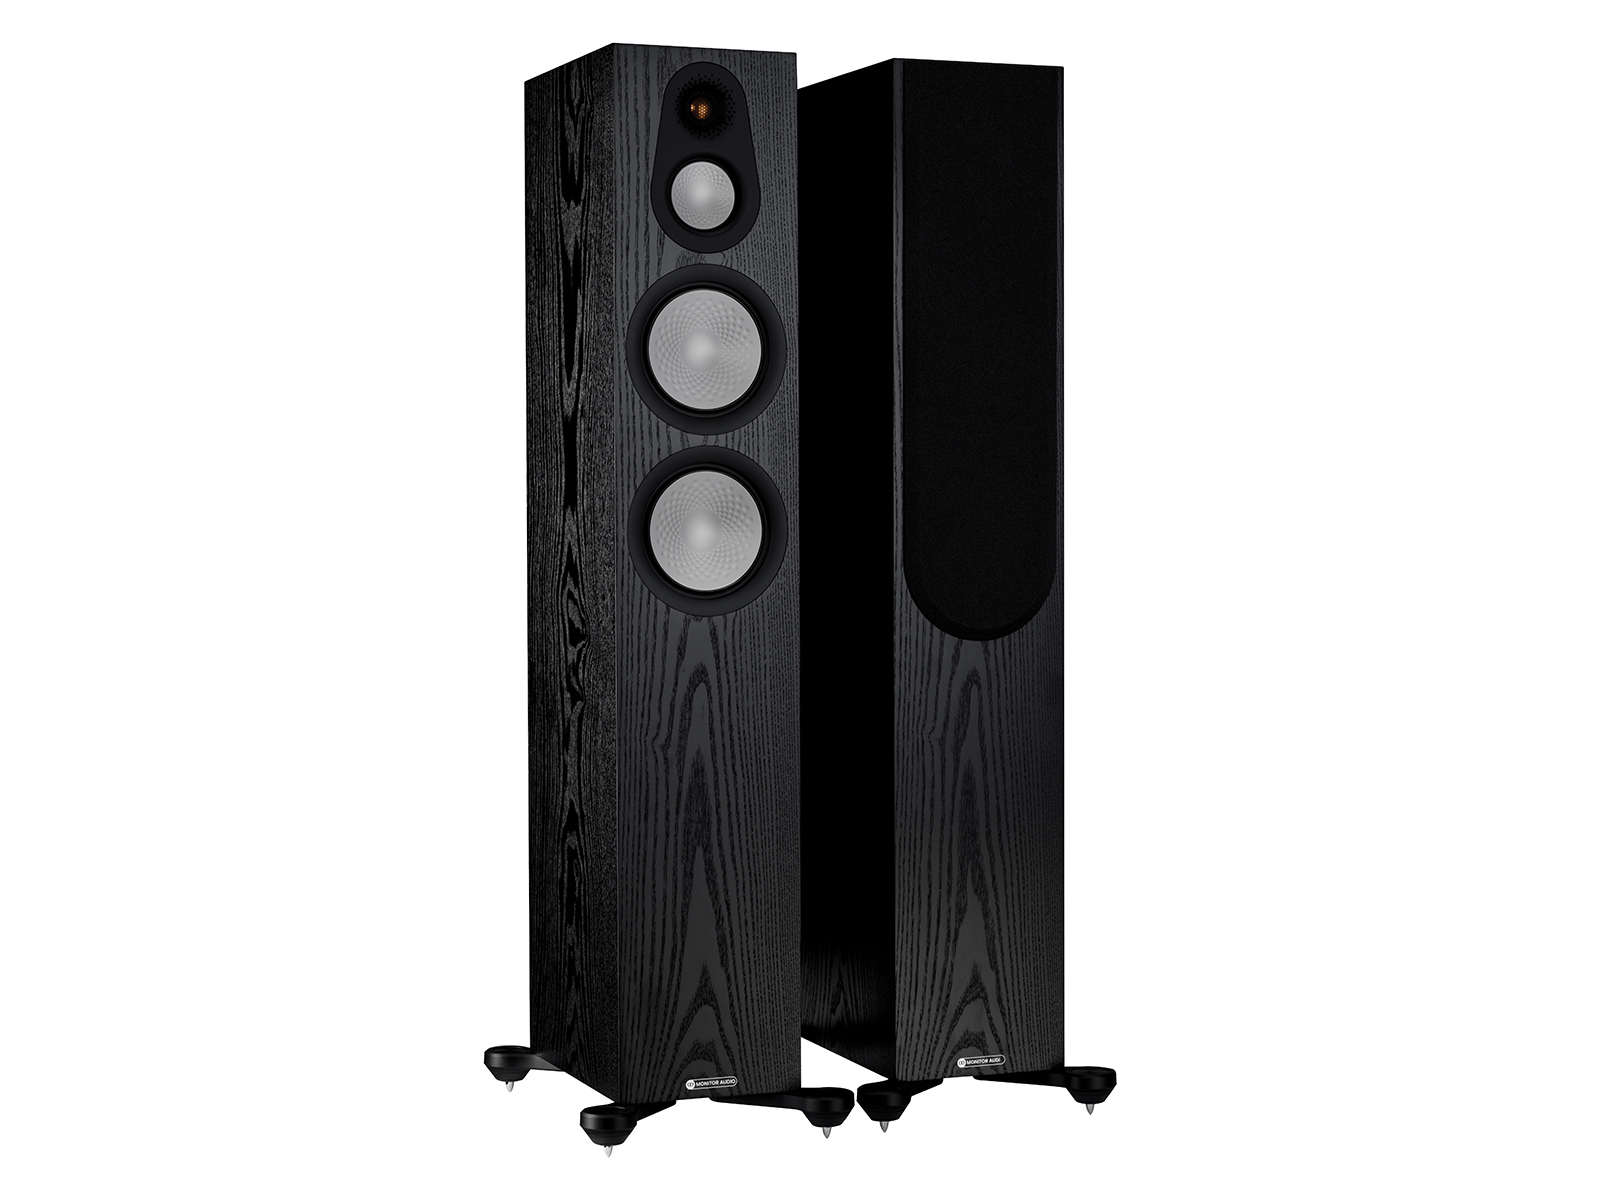 A pair of Monitor Audio's Silver 300 7G, in a black oak finish, iso view, with and without grilles.